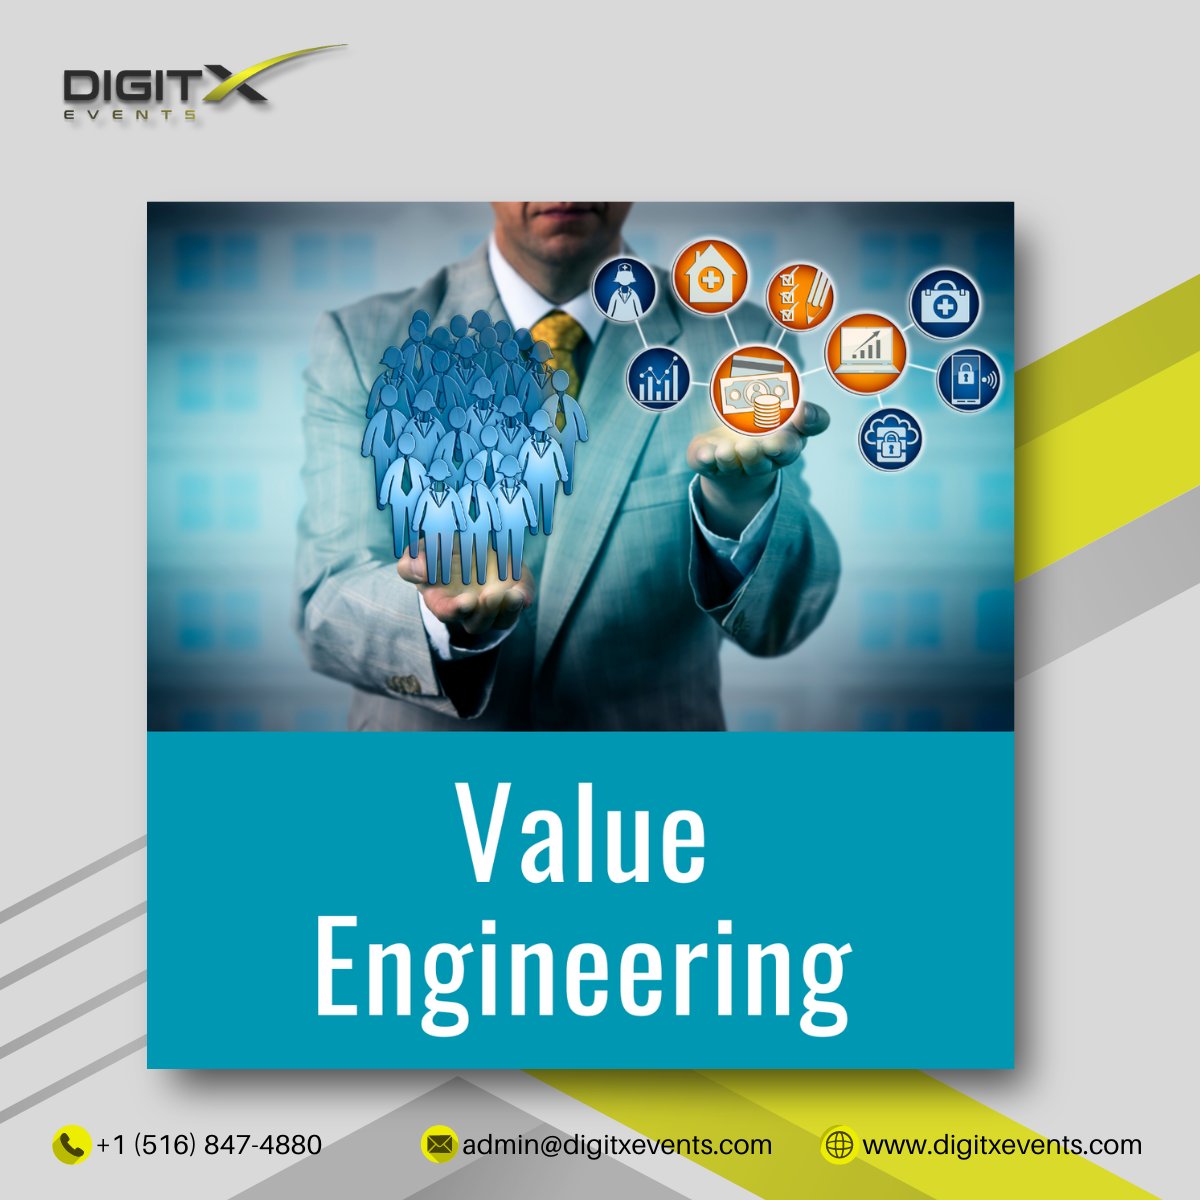 Explore Our upcoming training session 'Value Engineering'.

#ValueEngineering #InnovationMatters #OptimizeForSuccess #QualityOptimization #CostEffectiveDesign #CreativeSolutions #GlobalEfficiency #PrecisionInEngineering